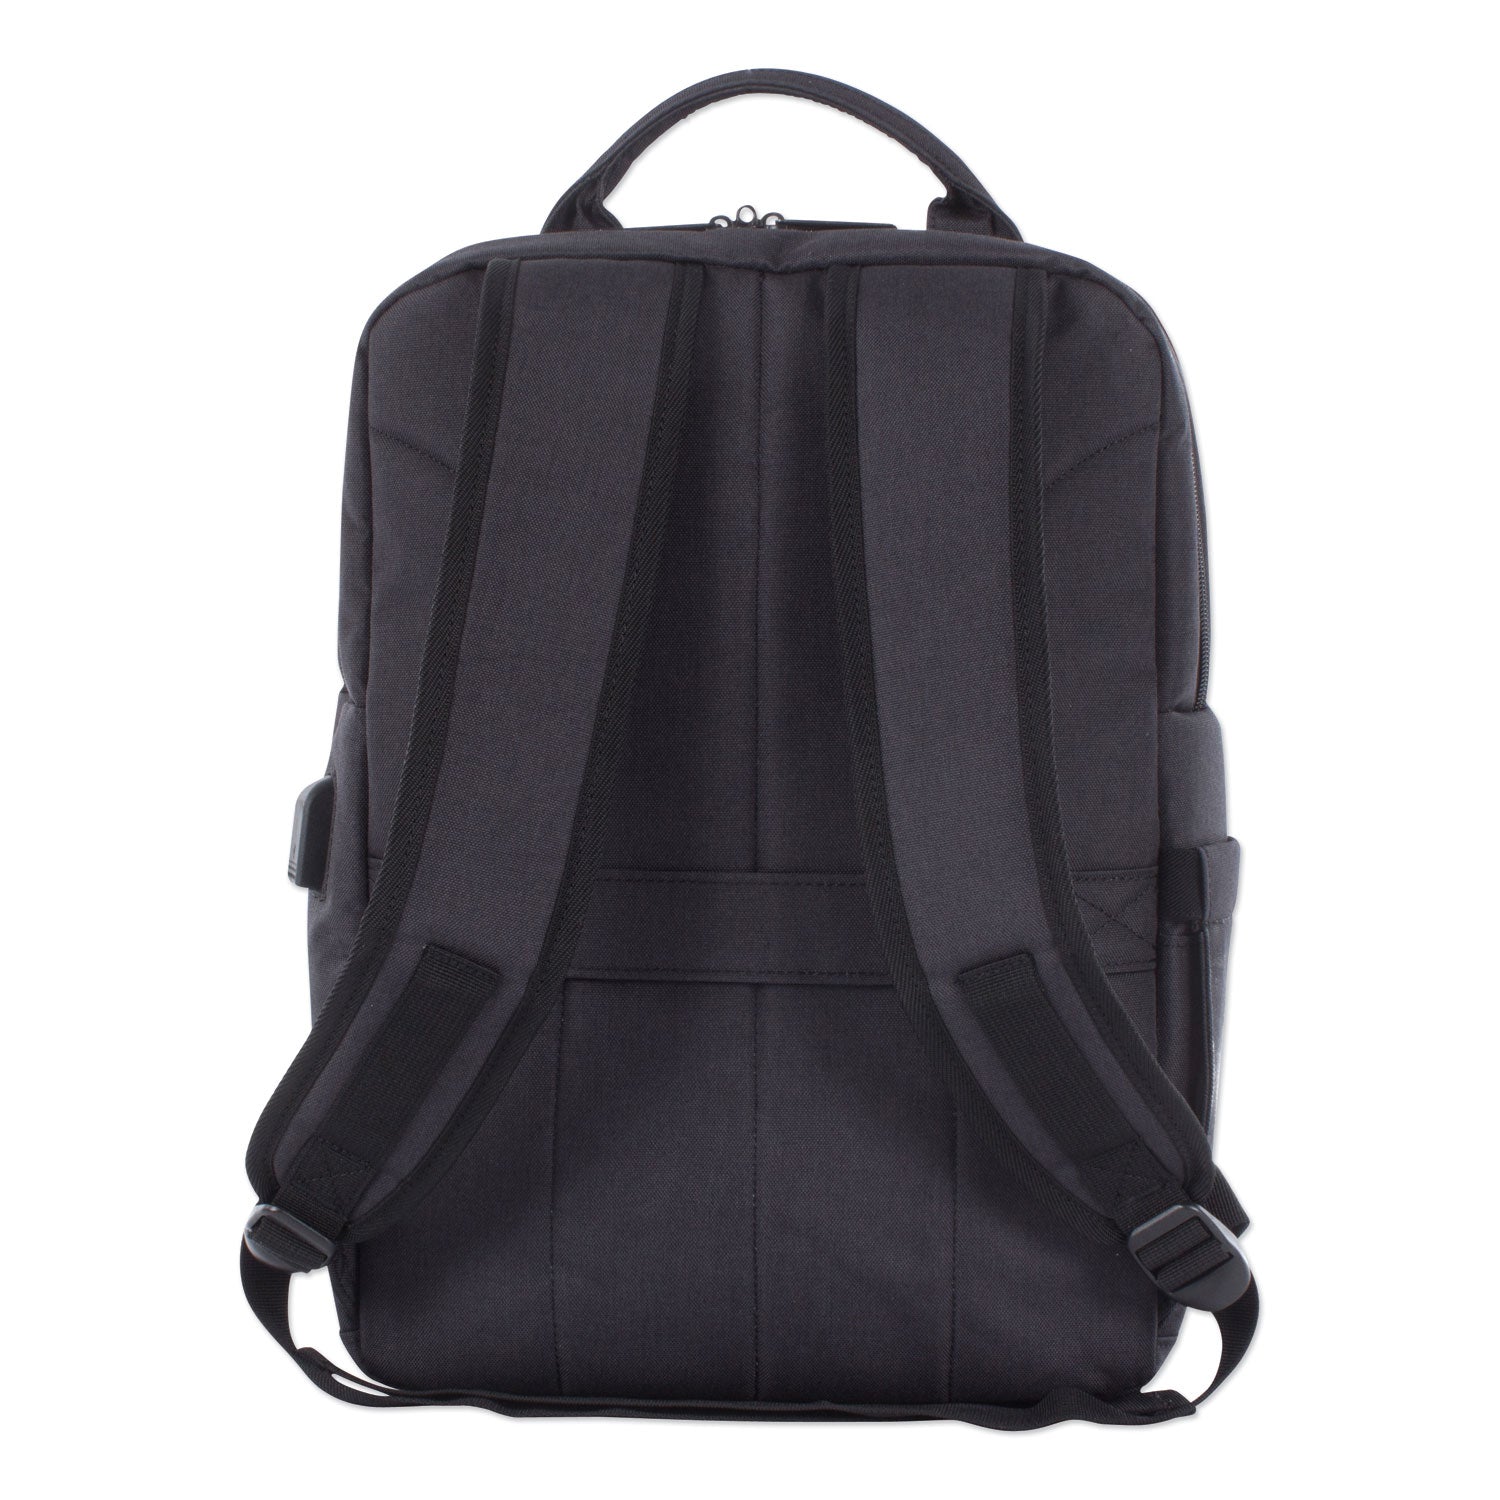 cadence-2-section-business-backpack-fits-devices-up-to-156-polyester-6-x-6-x-17-charcoal_swzbkp1012smch - 2